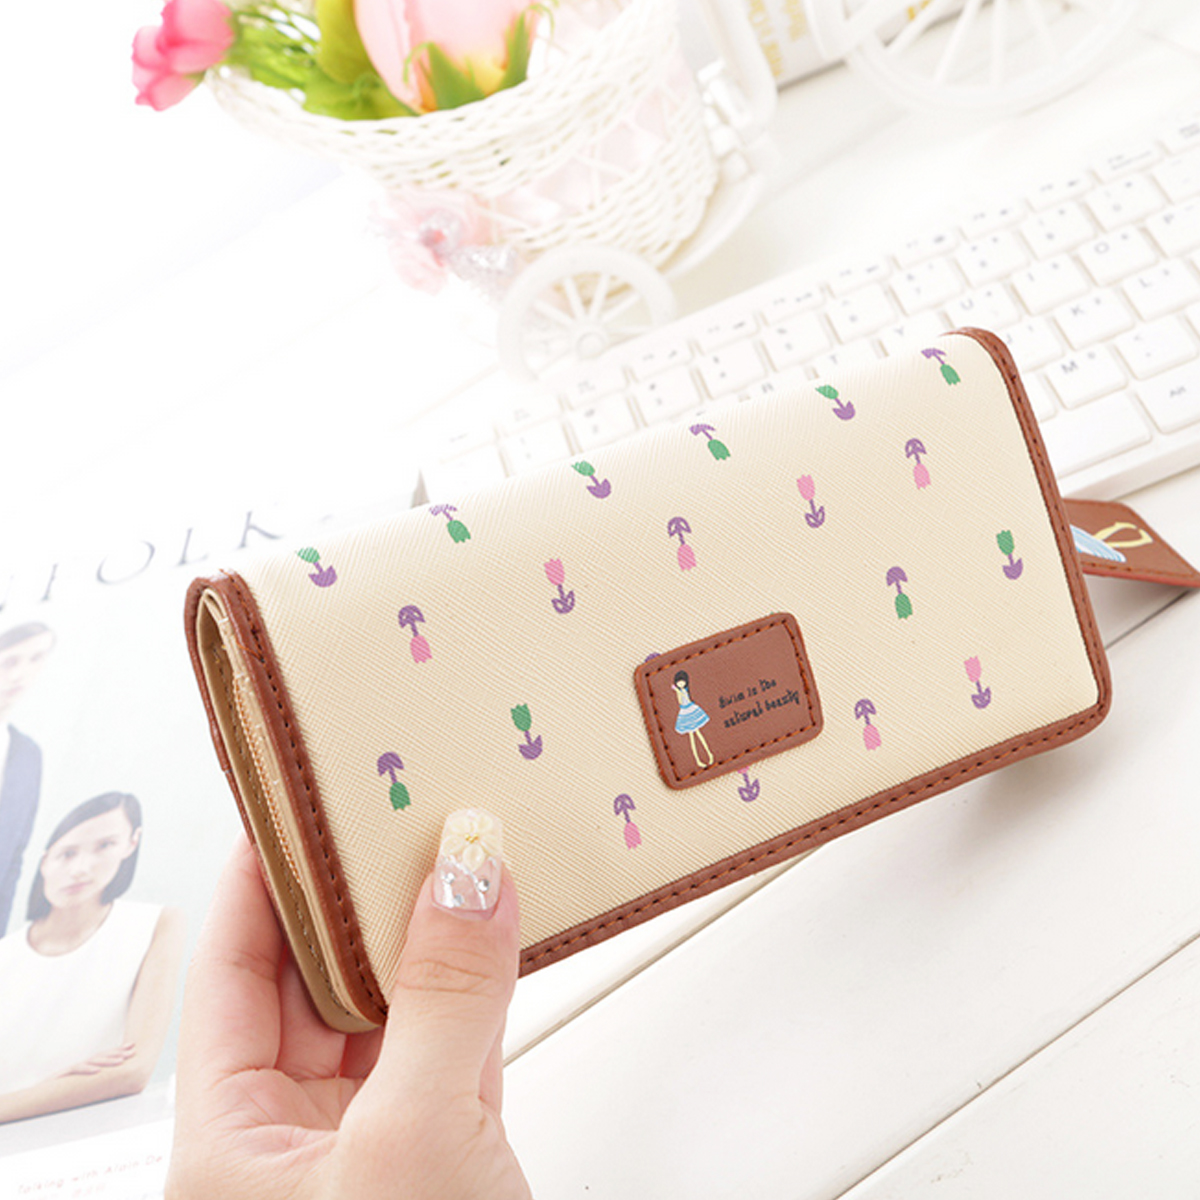 Fashion-Sweet-Girl-Leather-Women-Long-Wallet-Phone-Case-Card-Holder-for-iPhone-X-Samsung-S8-Xiaomi-6-1239355